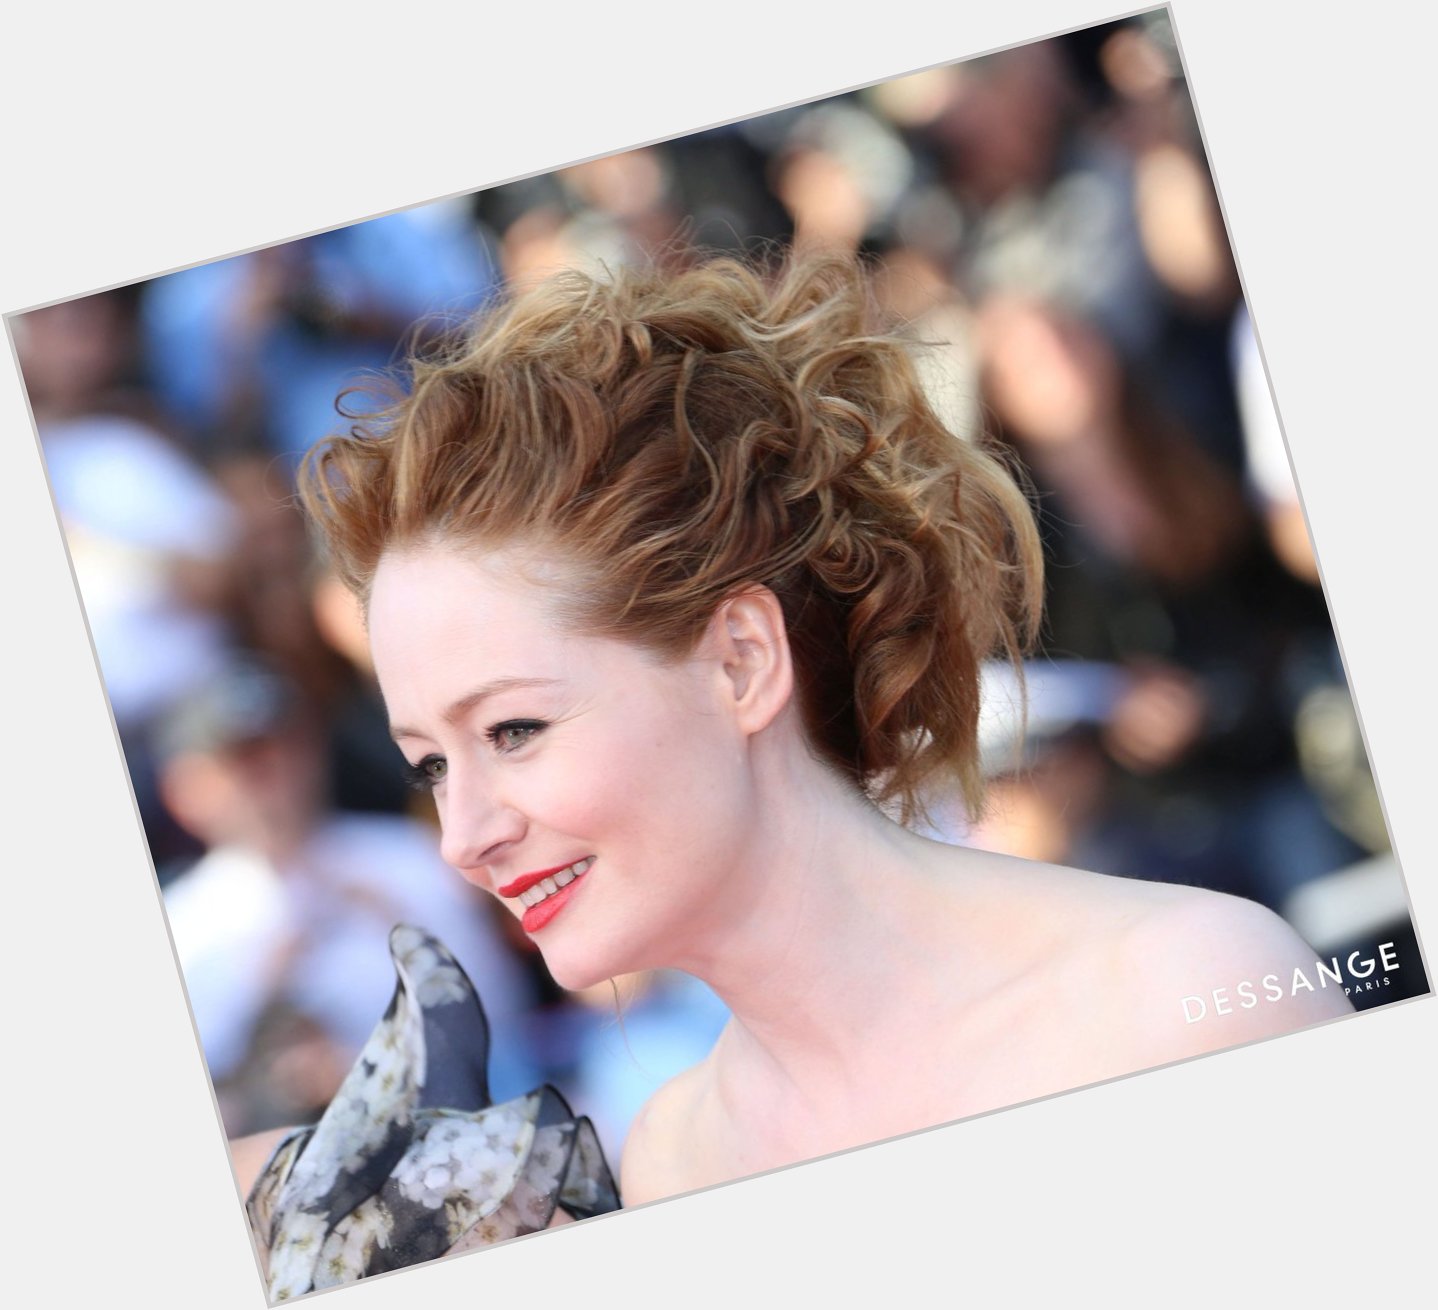 Happy bday miranda otto, you\re fucking perfect in every way front and back, félicitations ma belle  